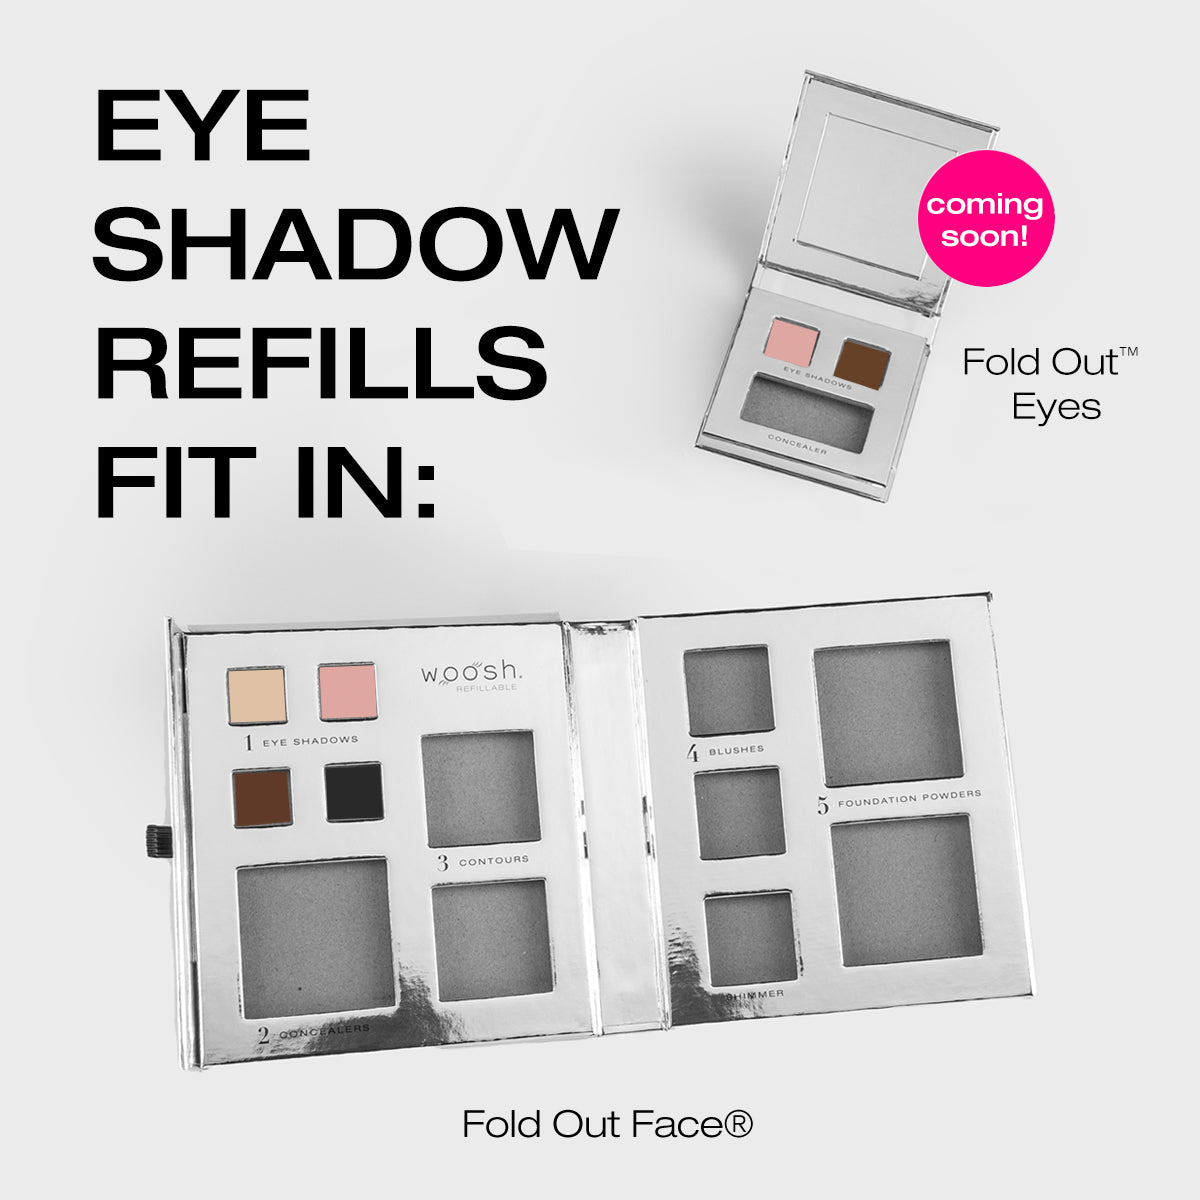 Demo of how eye shadow refills fit in the fold out eyes and fold out face palettes